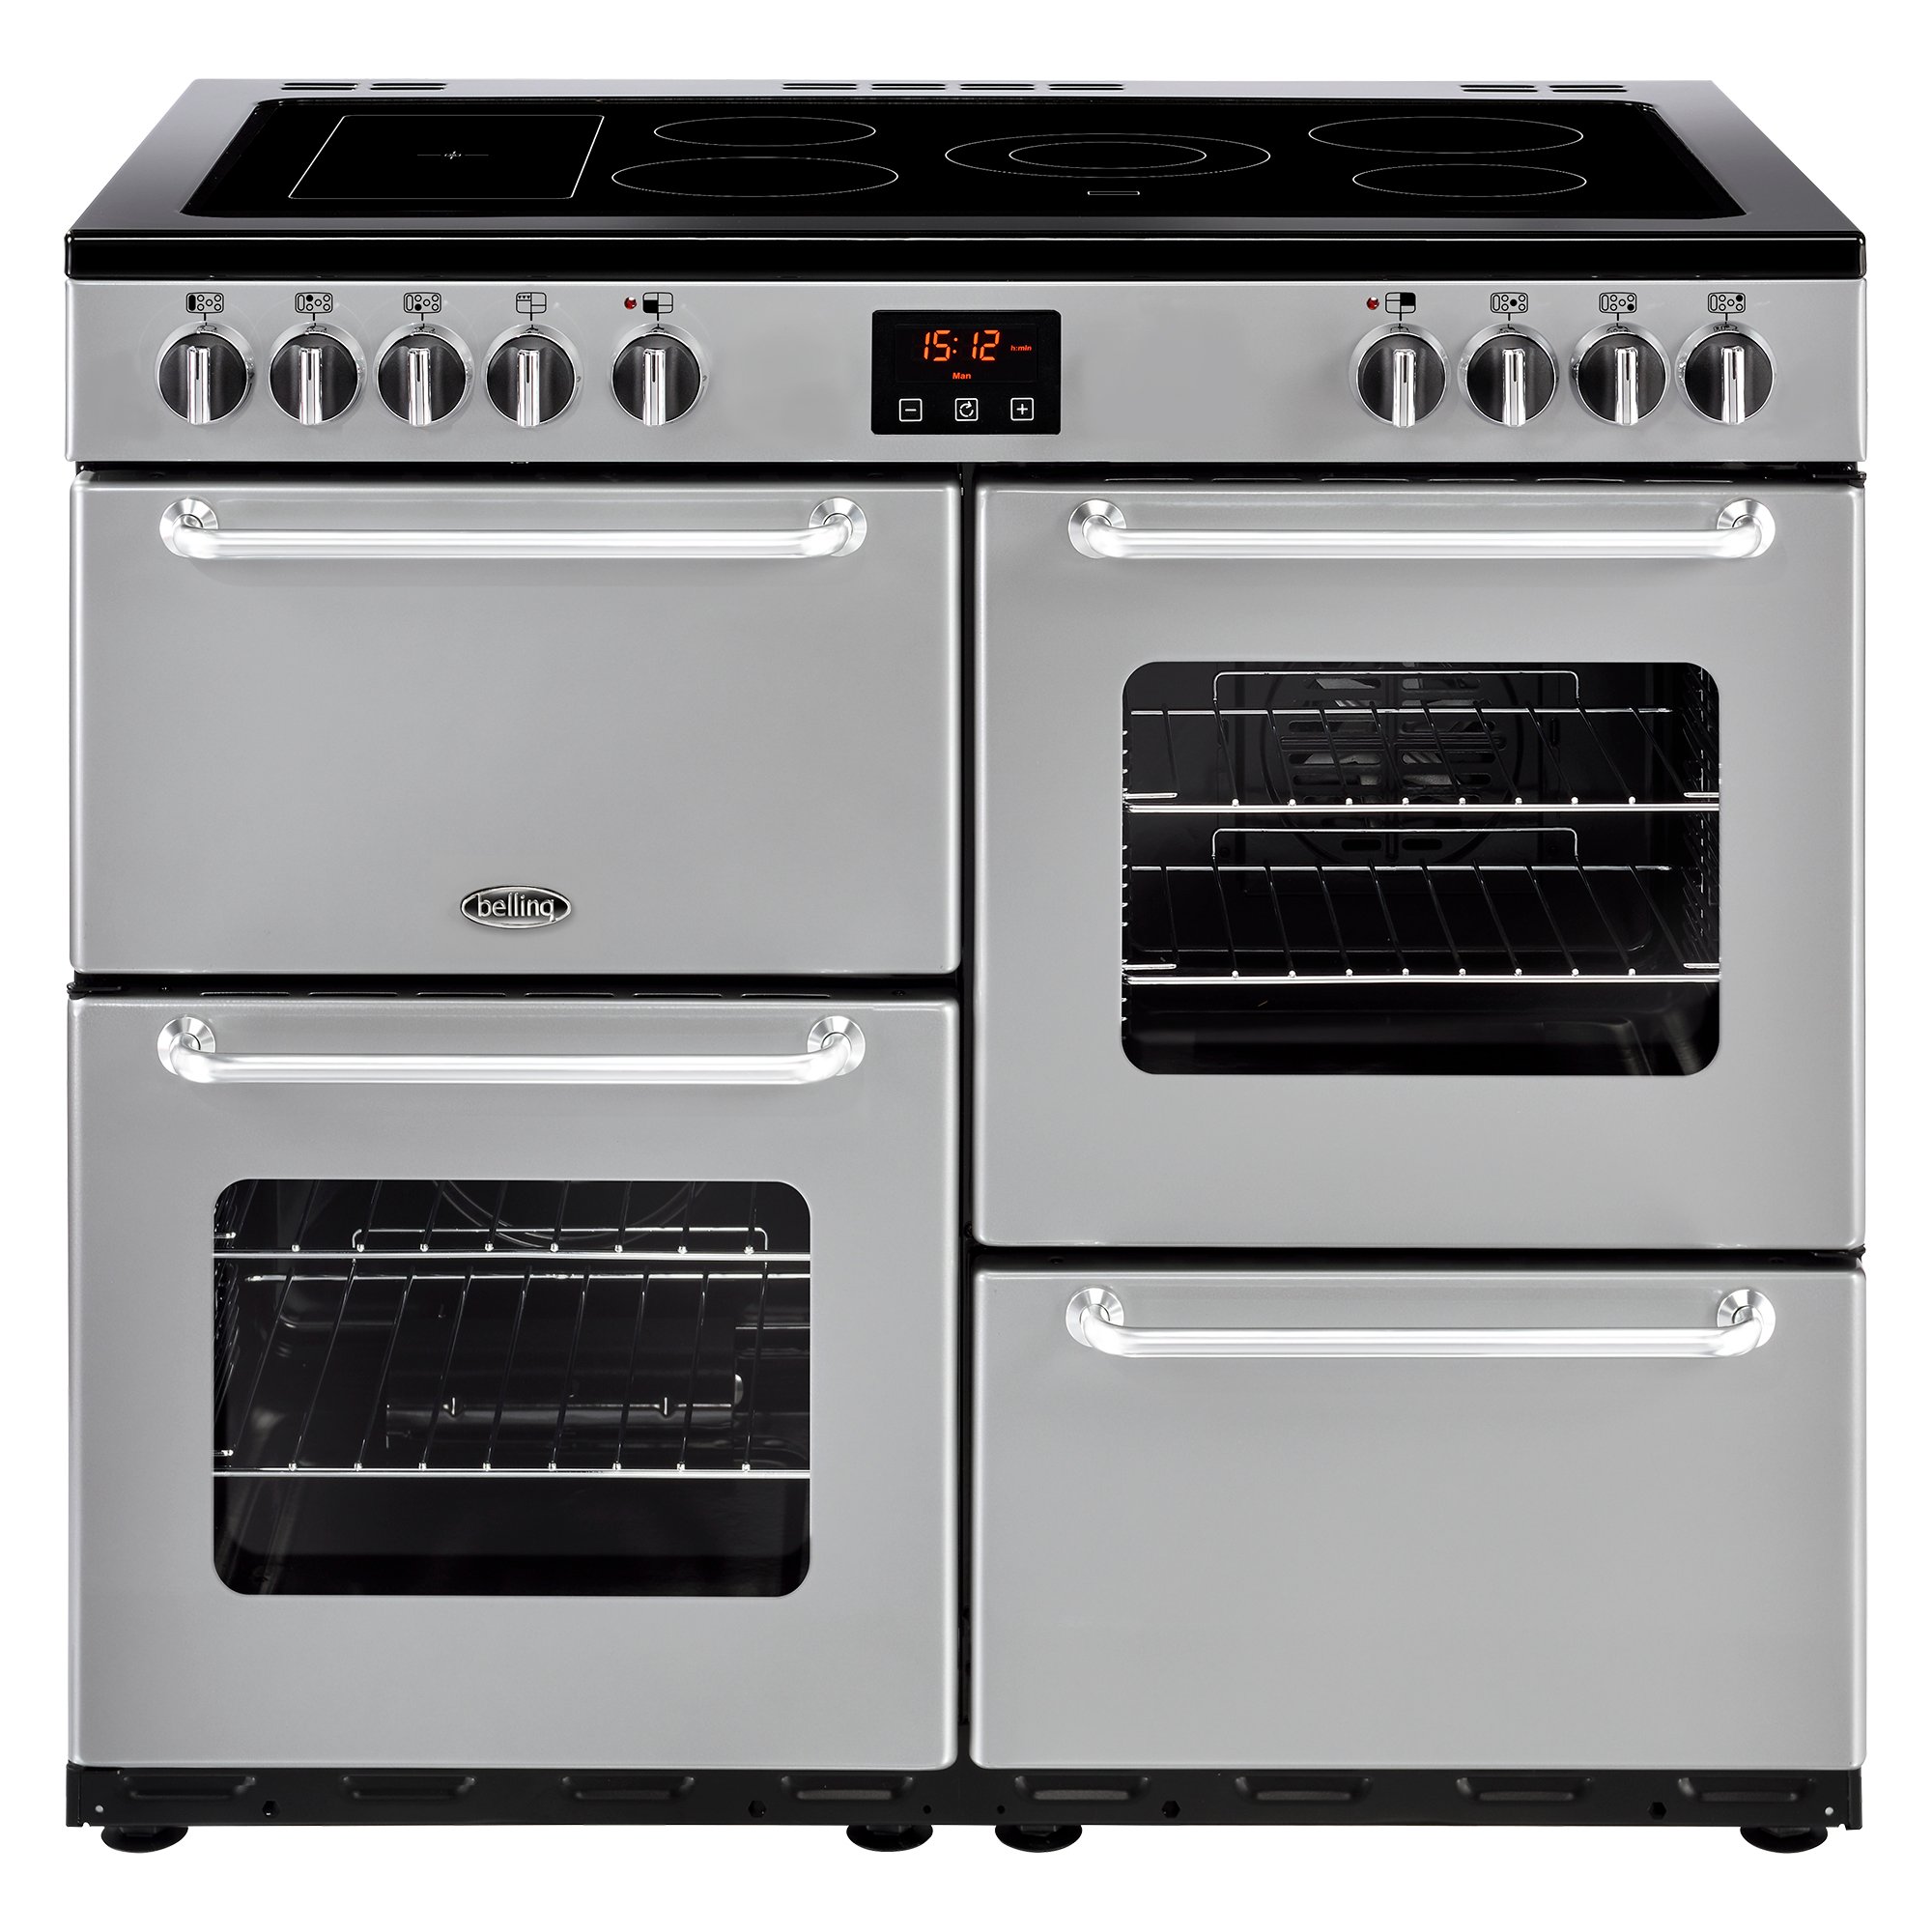 100cm electric range cooker with 5 zone ceramic hob and additional warming zone, variable rate electric grill, main fanned oven and a conventional second oven.